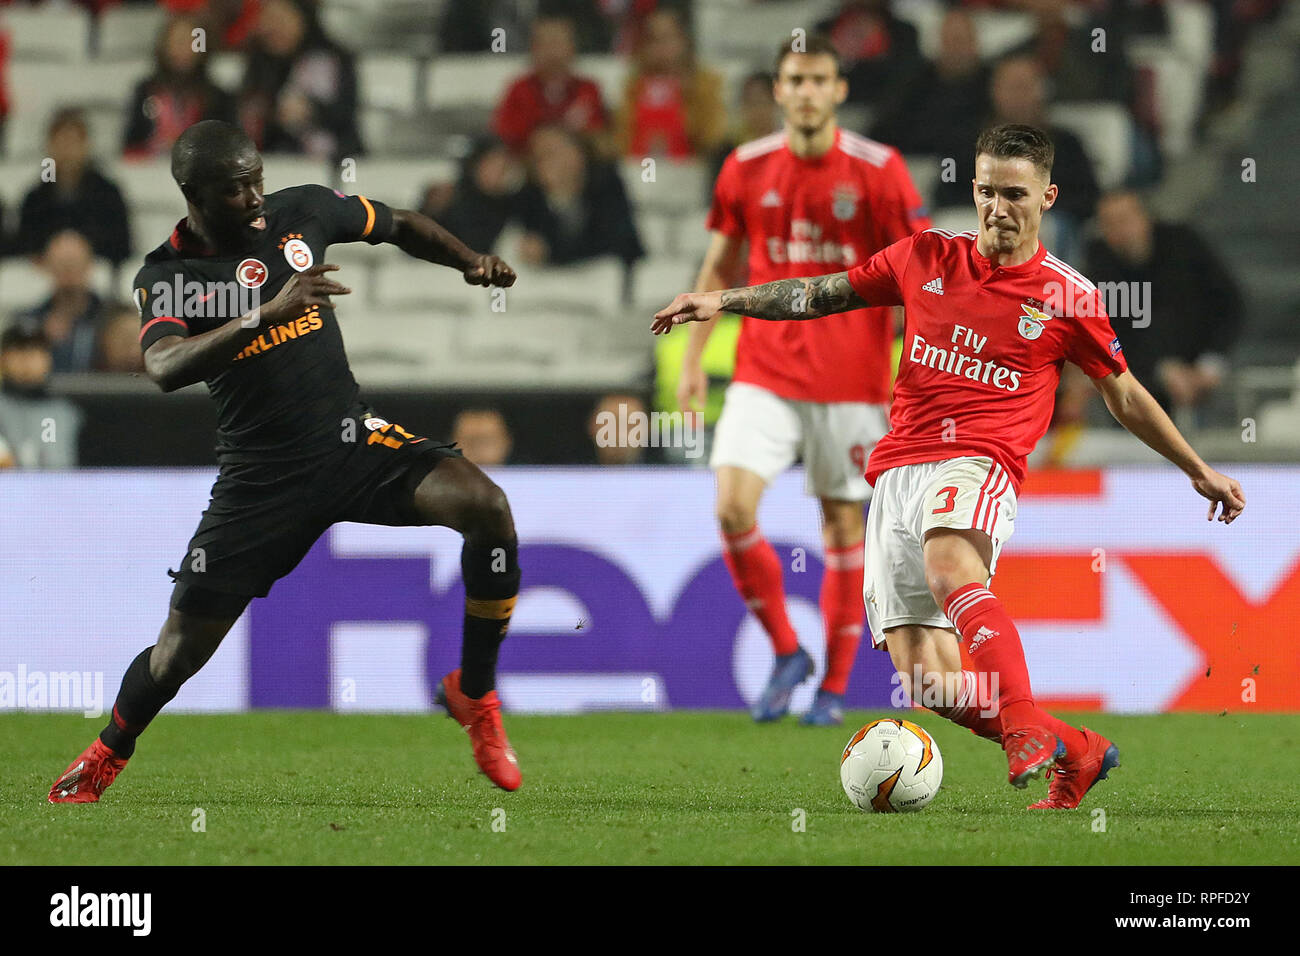 Badou Ndiaye of Galatasaray AS (L) vies for the ball with Álex Grimaldo of SL Benfica (R) during the Europa League 2018/2019 footballl match between SL Benfica vs Galatasaray AS.  (Final score: SL Benfica 0 - 0 Galatasaray AS) Stock Photo